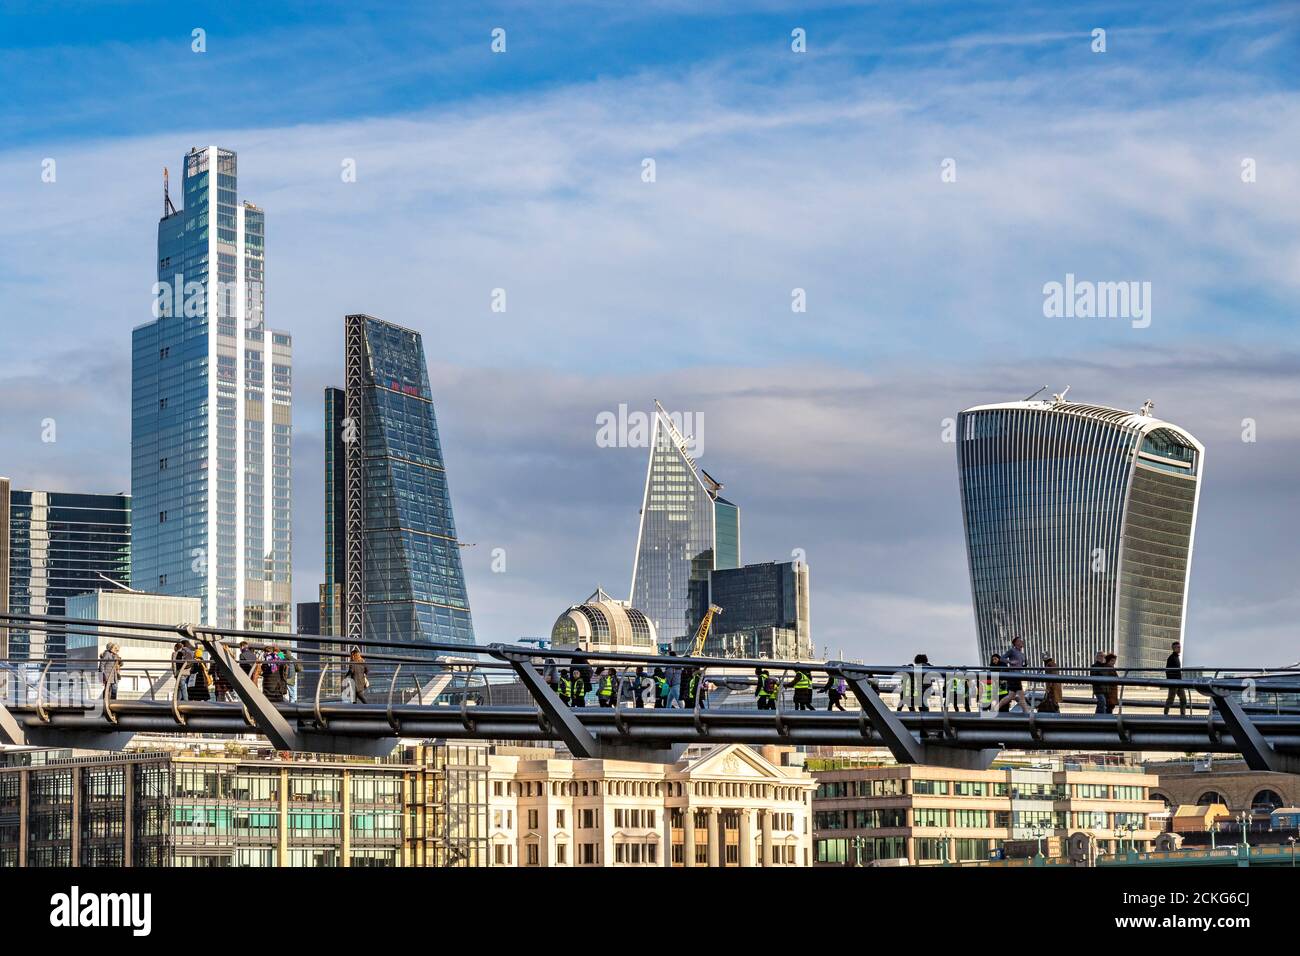 People crossing The Millennium Bridge, a footbridge across The River Thames with The City Of London skyline in the background , London,UK Stock Photo